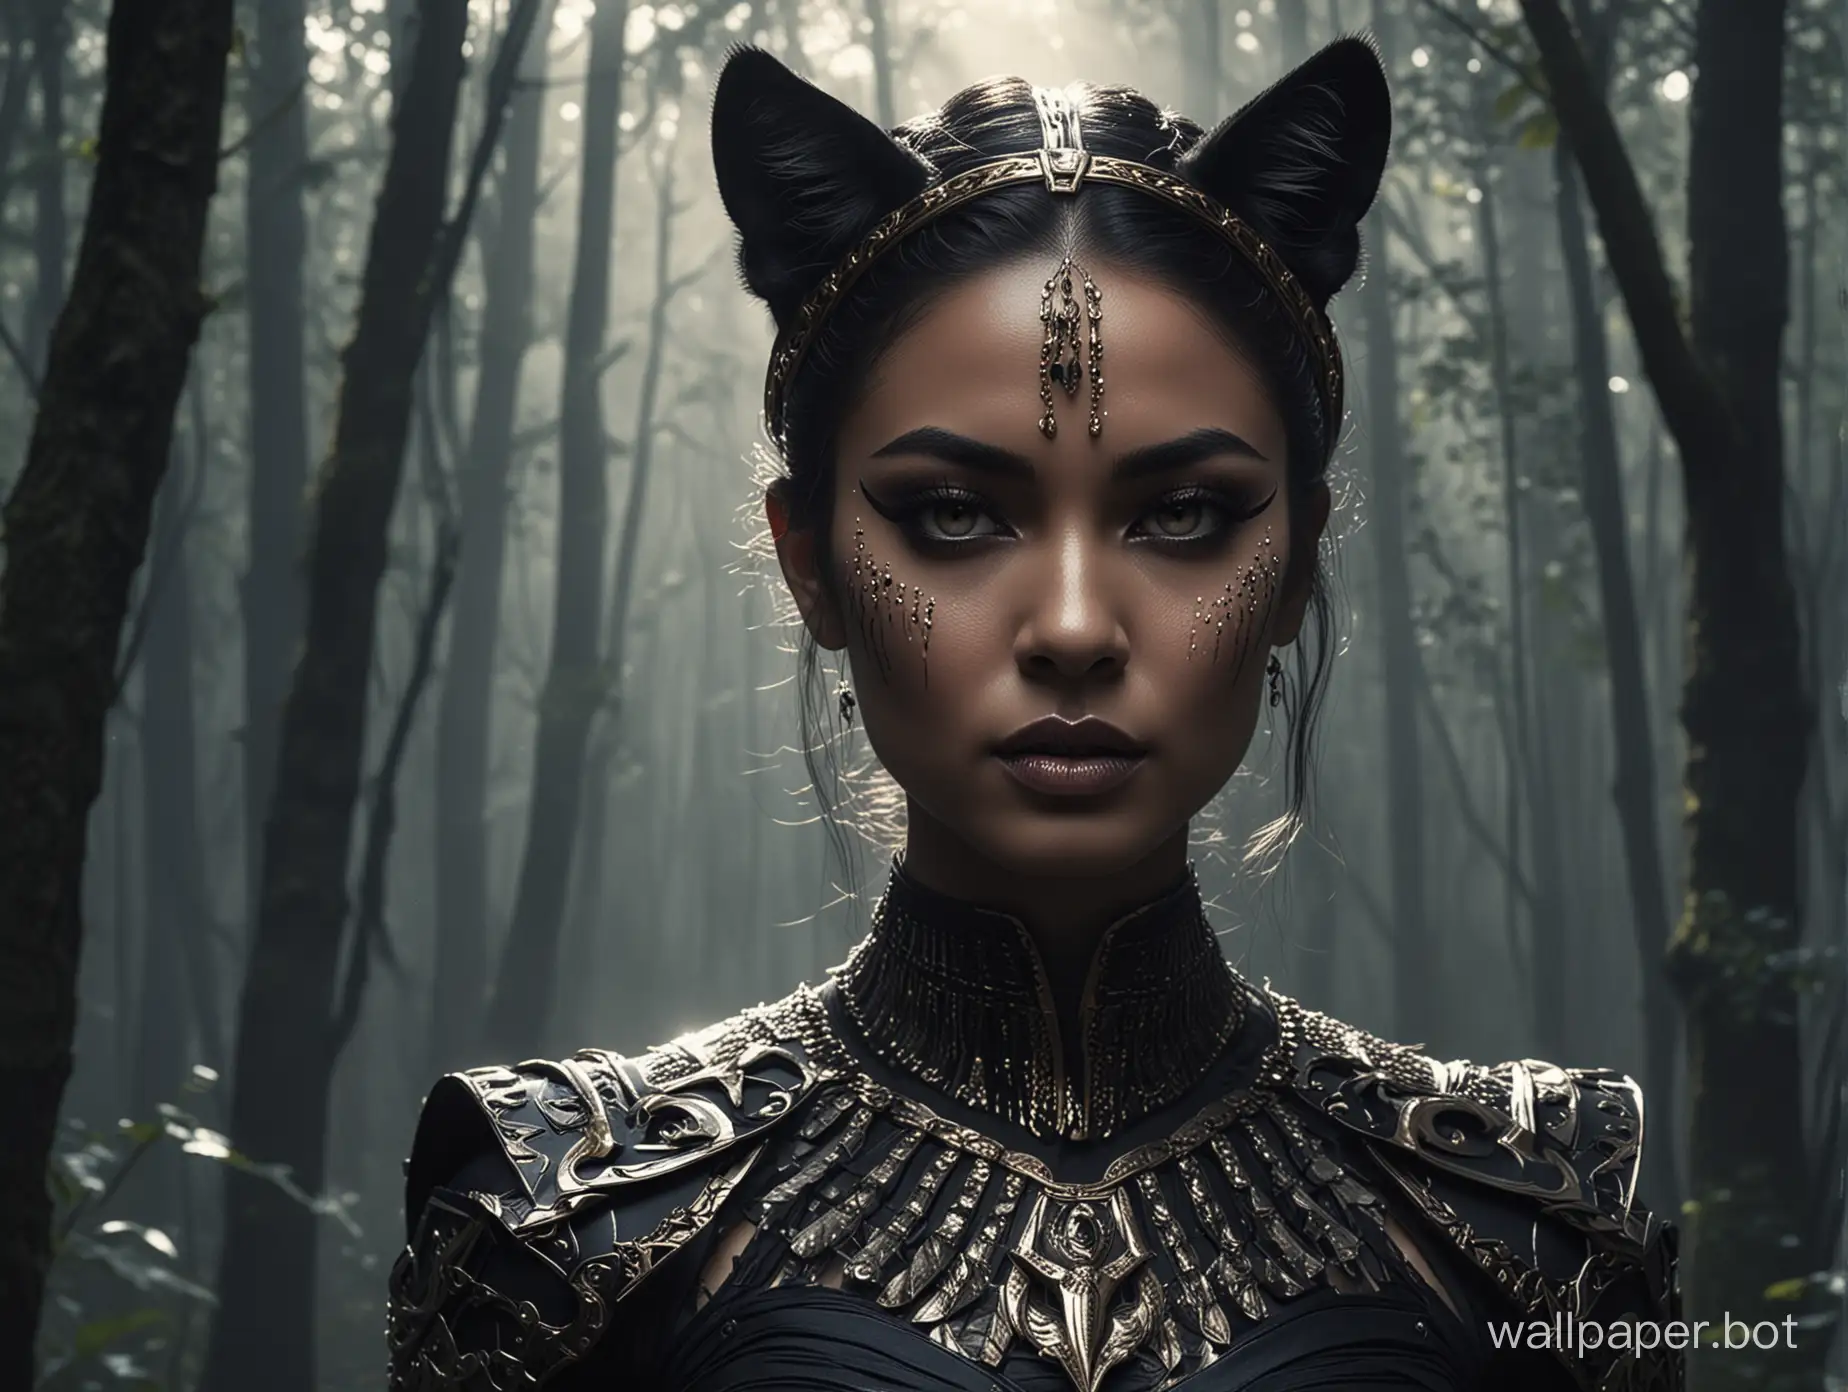 A mesmerizing cinematic poster featuring a powerful panther queen warrior woman, embodying a captivating fusion of fierce strength and enchanting allure. The queen, adorned with striking black eyeshadow and dramatic cat eyeliner, showcases her feline-like features while dressed in a stunning outfit that combines modern fashion with warrior-inspired elements, such as a metallic armour top and a flowing skirt. The mystical, moonlit forest in the background provides an enchanting setting, with shadows adding depth and dimension to the scene. The overall image radiates confidence, power, and a tantalizing air of mystery., poster, cinematic, portrait photography, fashion